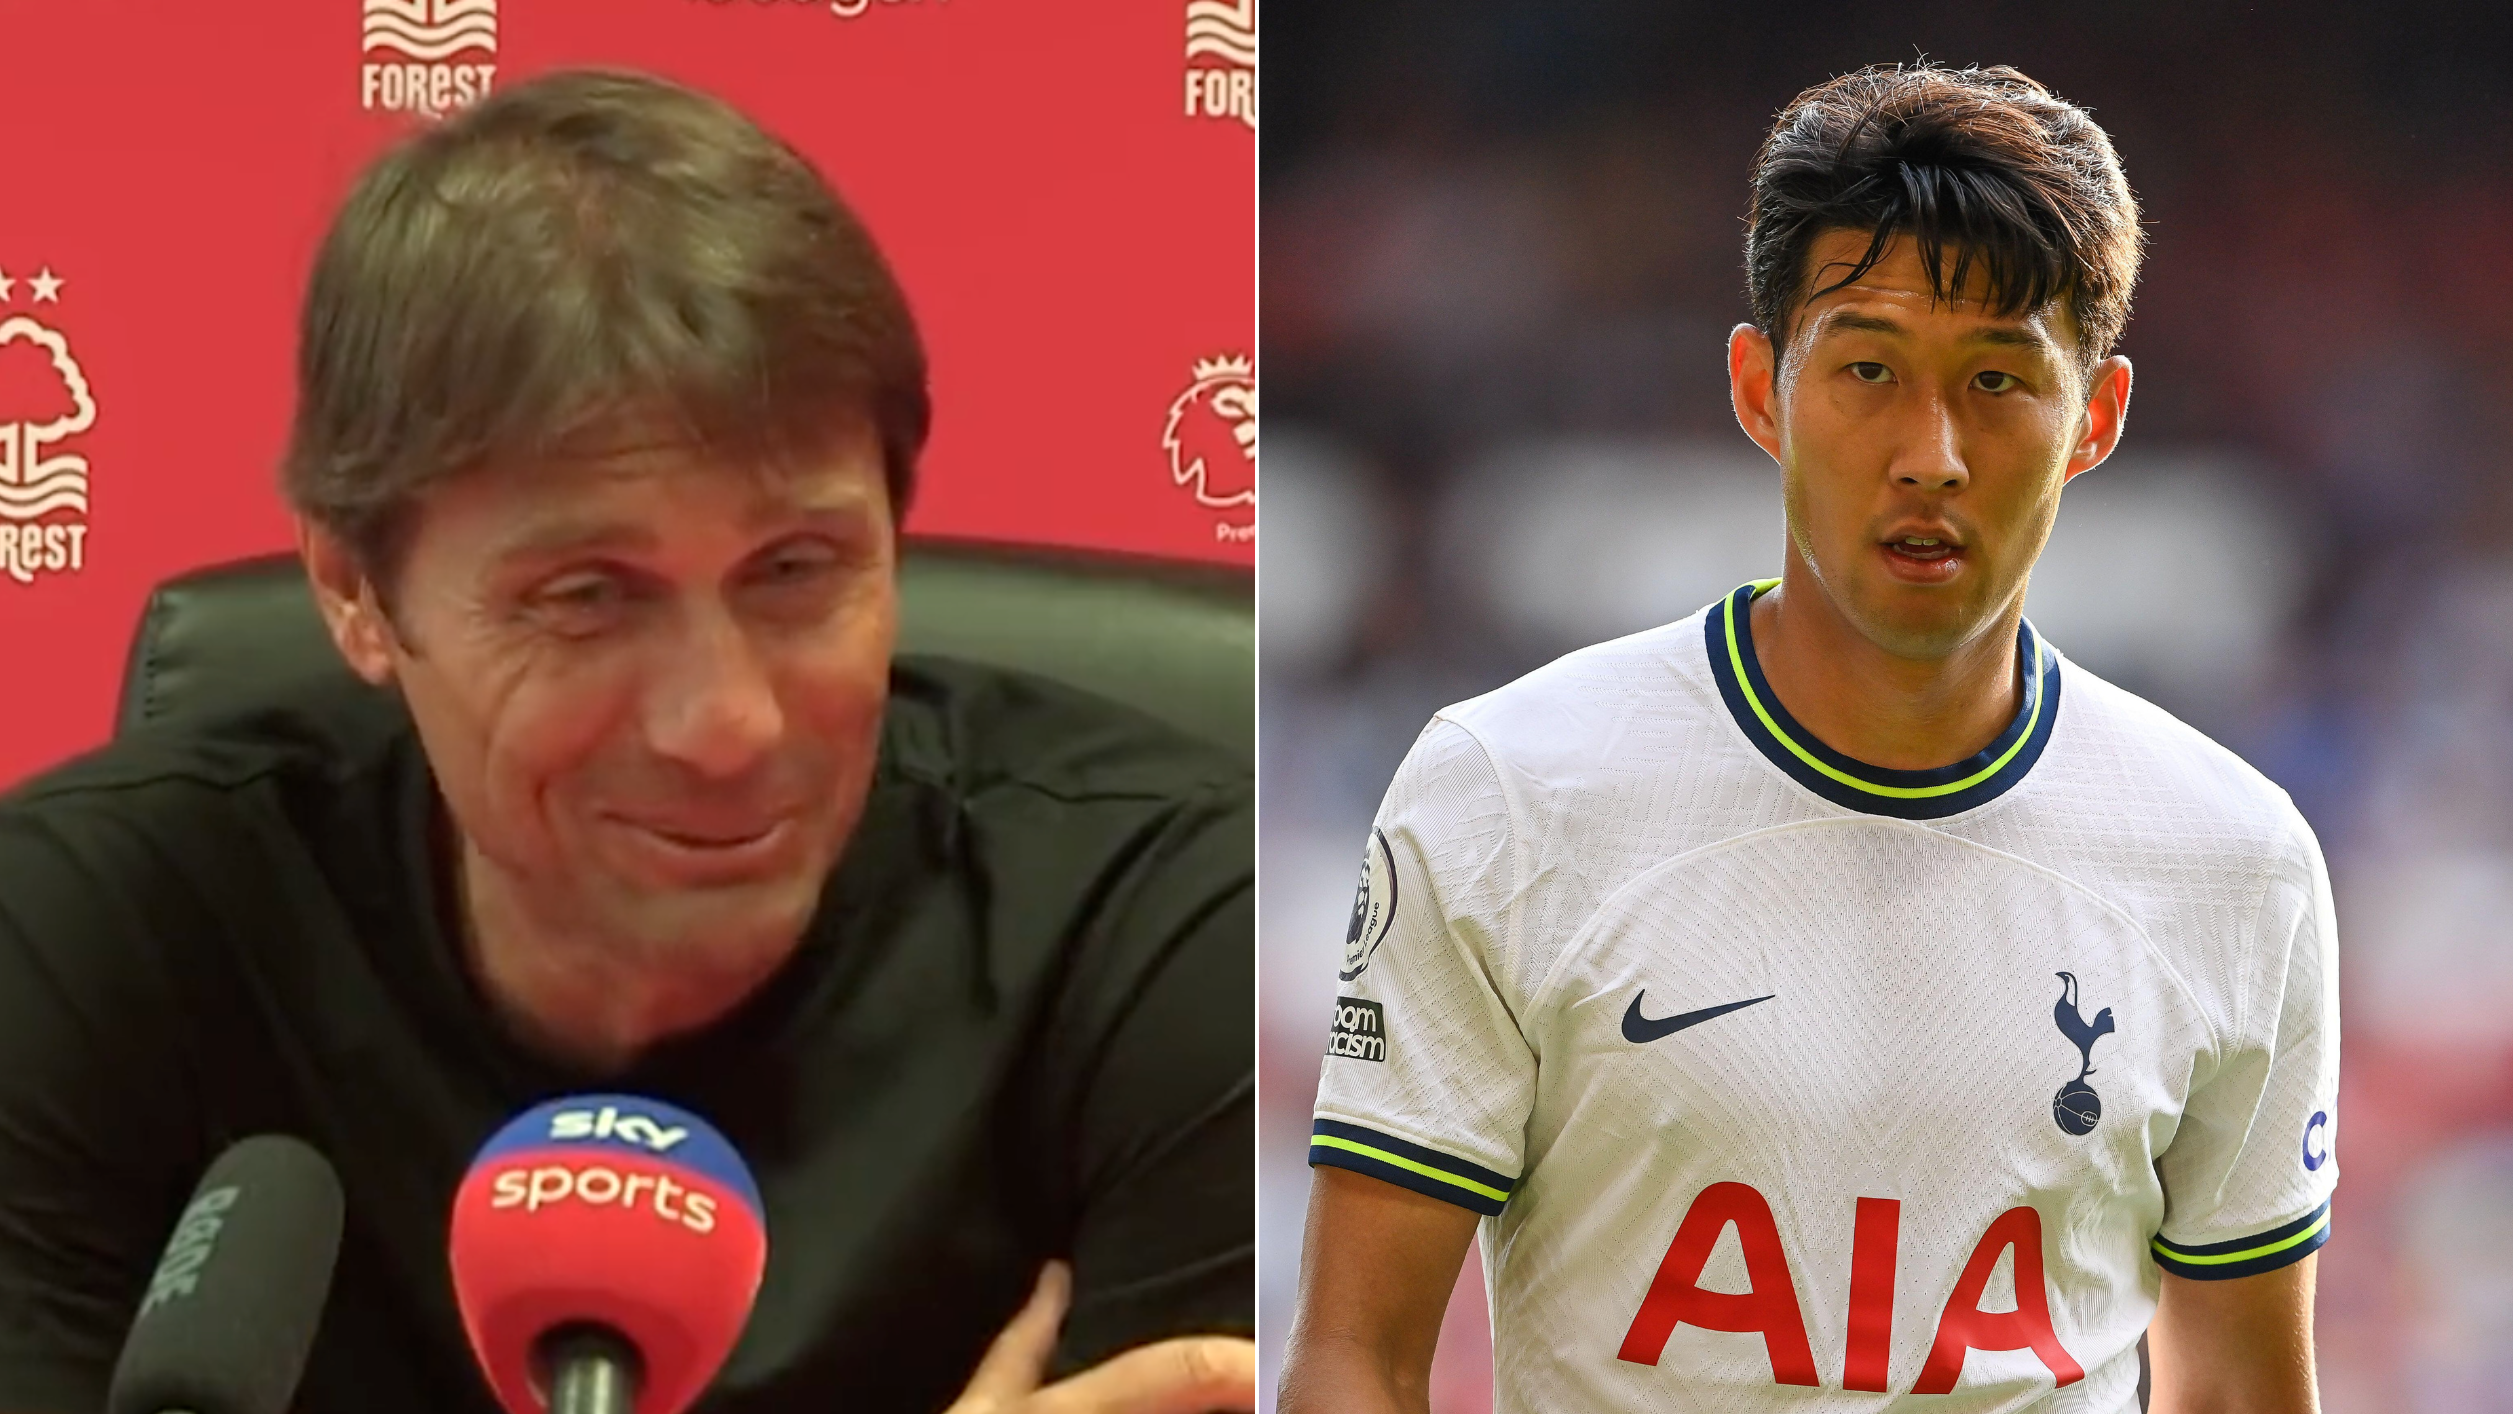 Antonio Conte sends clear message about angry Son Heung-min amid